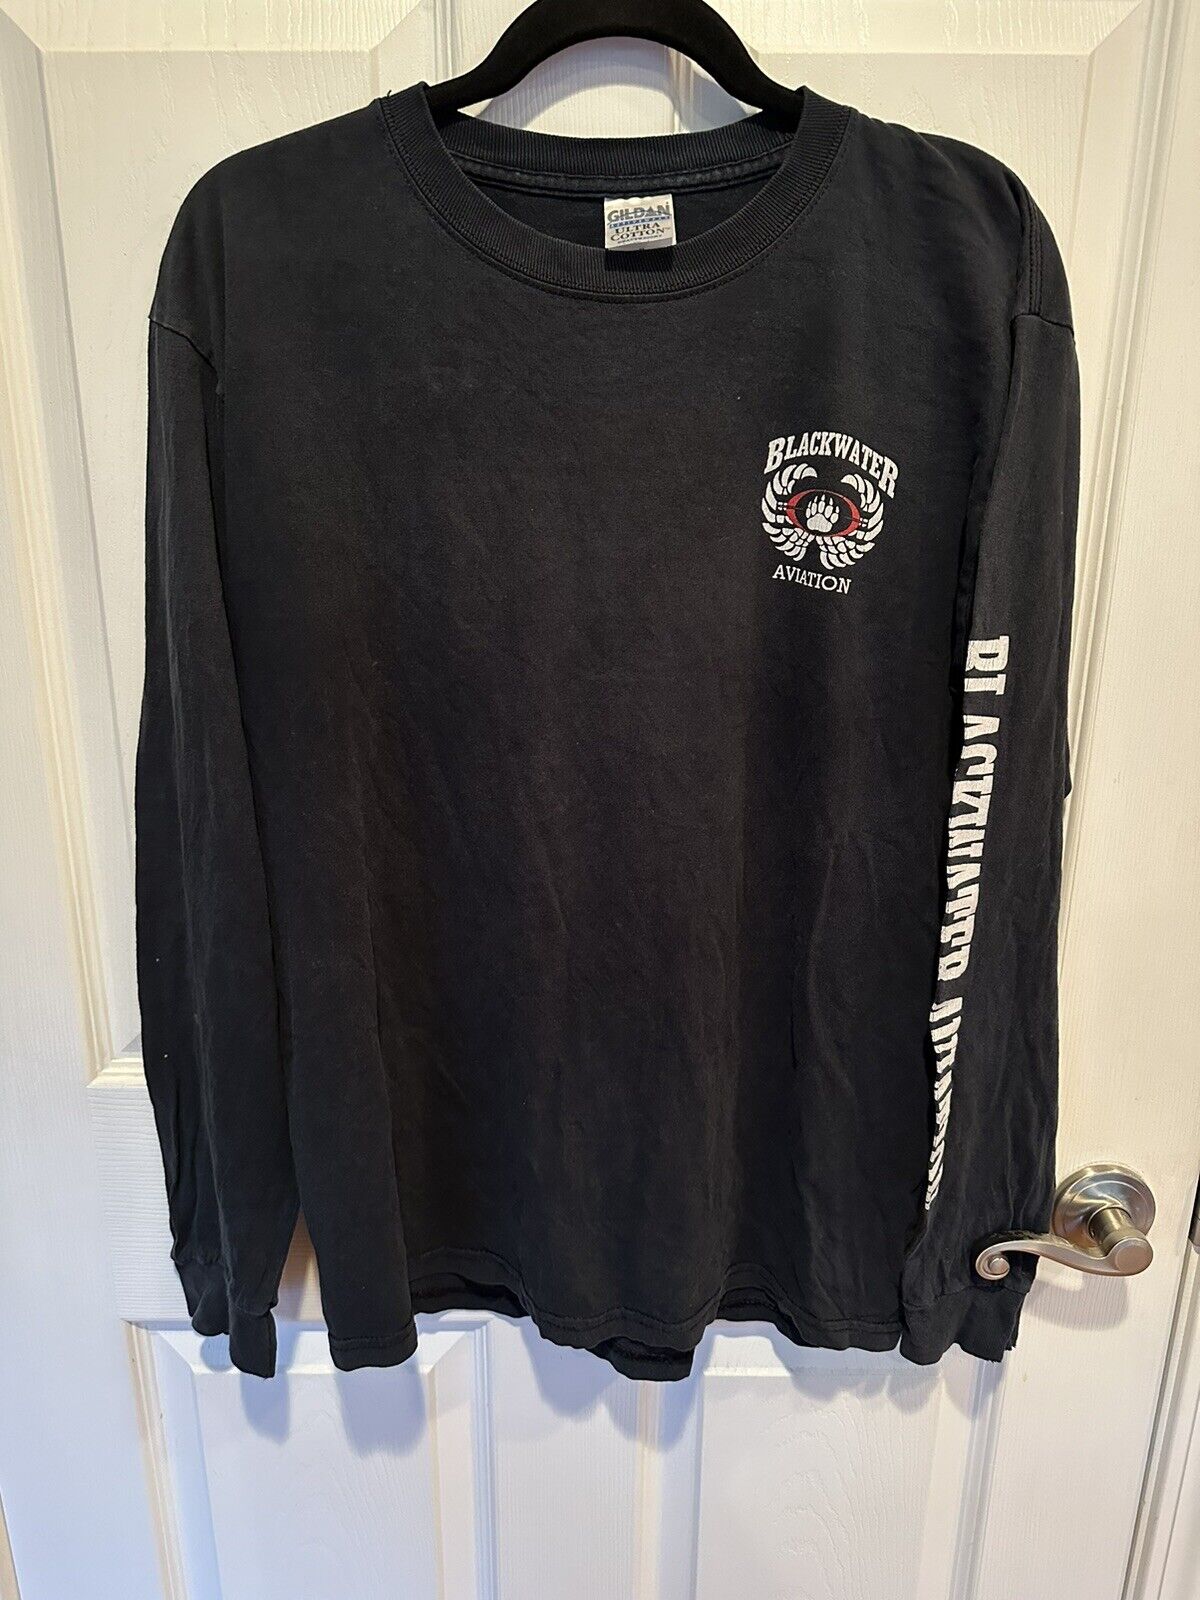 Blackwater Aviation Private Military Security Contractor Long Sleeve Medium Blk